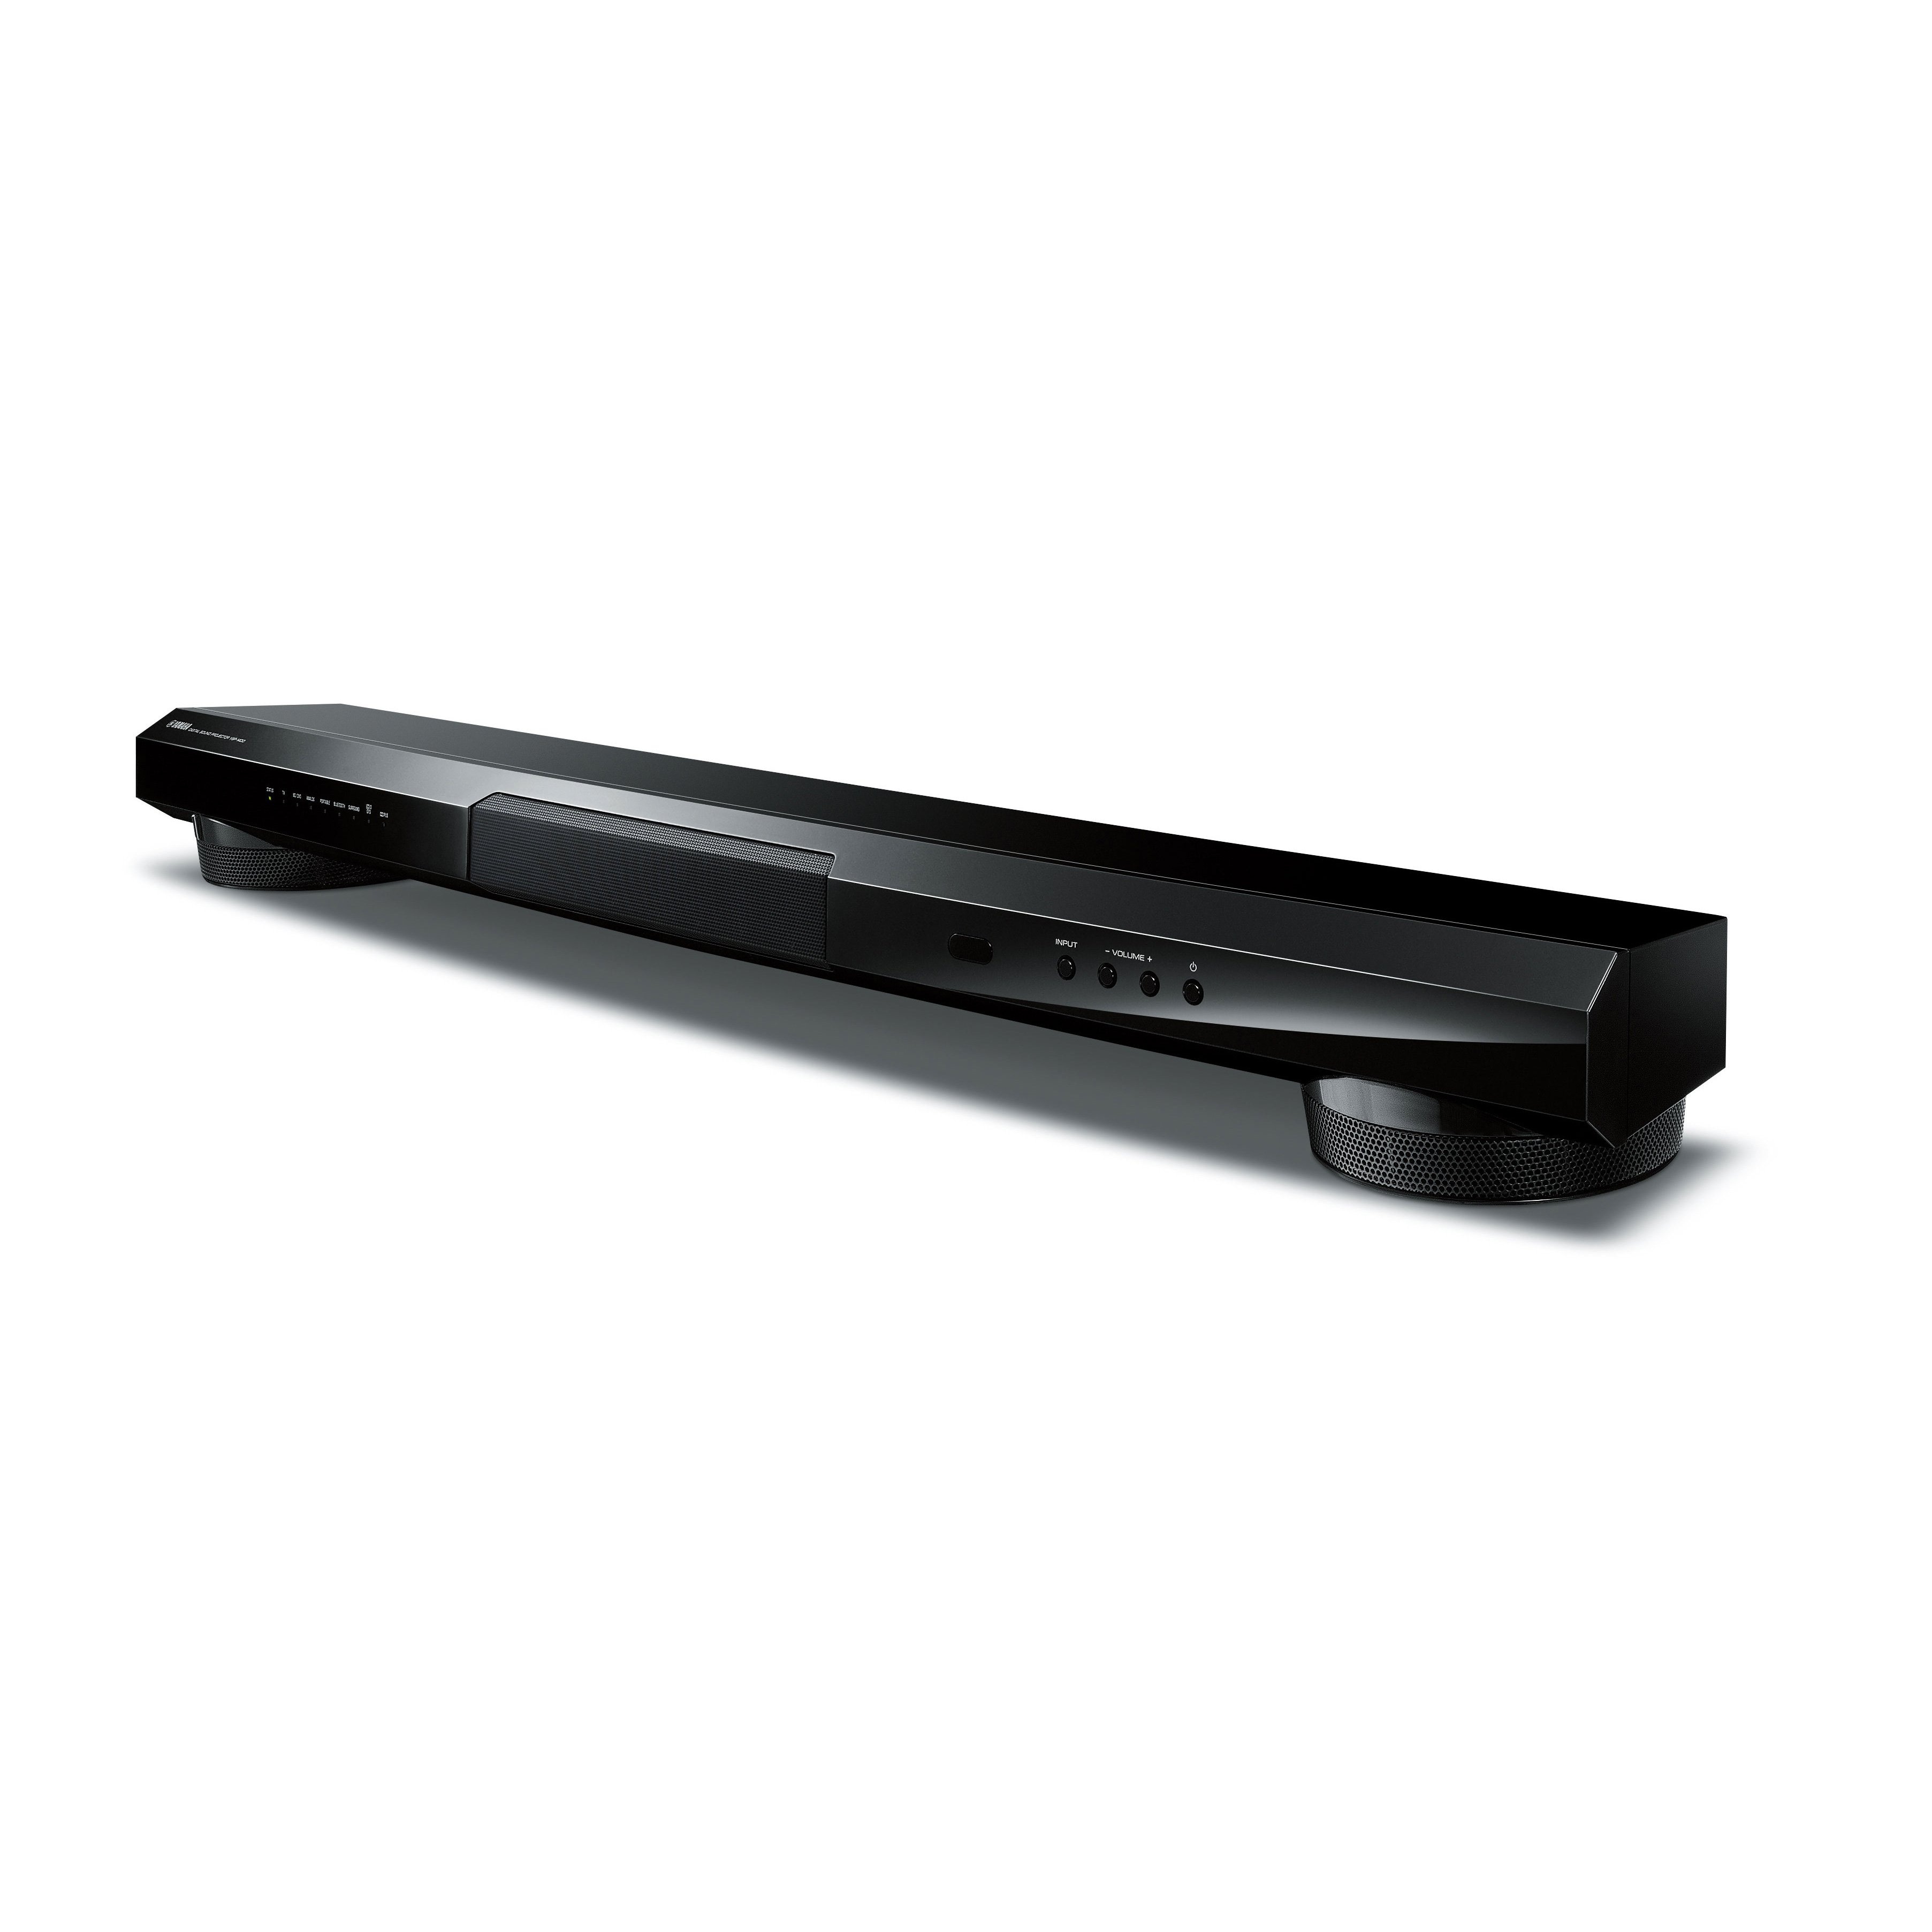 YSP-1400 - Overview - Sound Bars - Audio & Visual - Products 